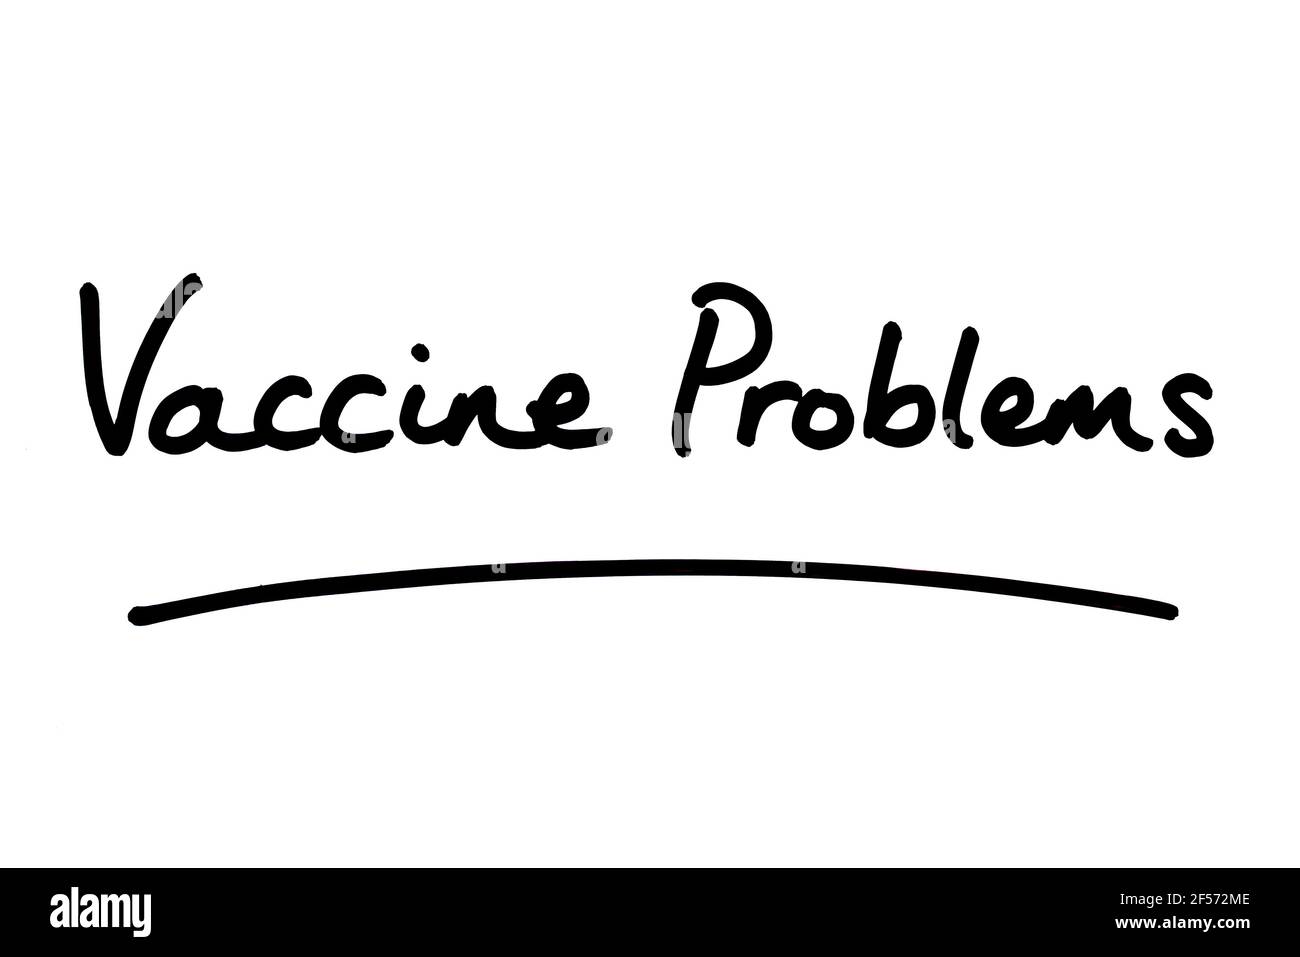 Vaccine Problems, handwritten on a white background. Stock Photo